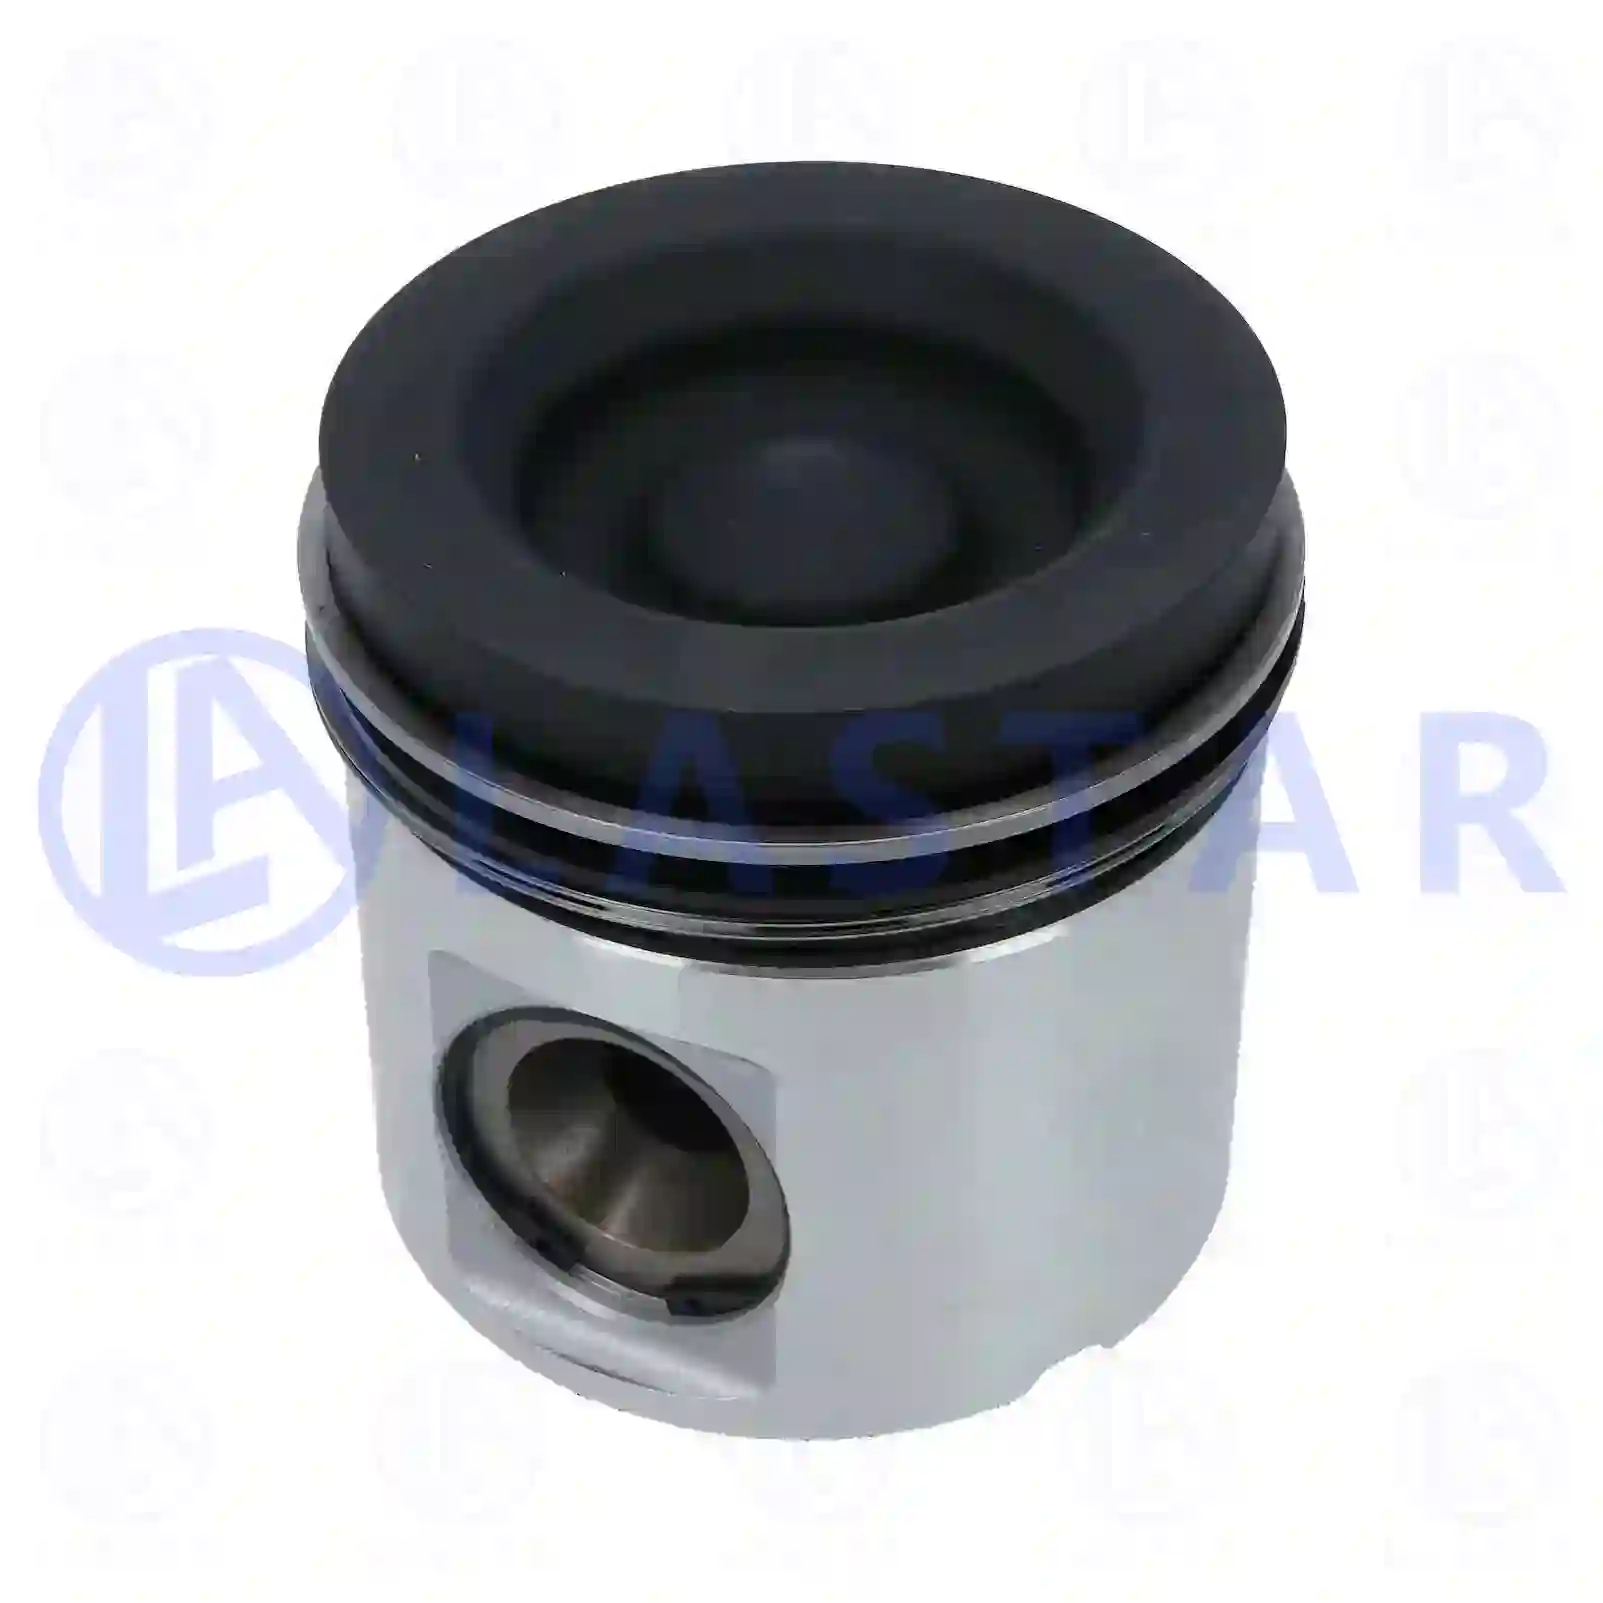 Piston, complete with rings, 77702500, 519613, 1545952, 1549773, 1791992 ||  77702500 Lastar Spare Part | Truck Spare Parts, Auotomotive Spare Parts Piston, complete with rings, 77702500, 519613, 1545952, 1549773, 1791992 ||  77702500 Lastar Spare Part | Truck Spare Parts, Auotomotive Spare Parts